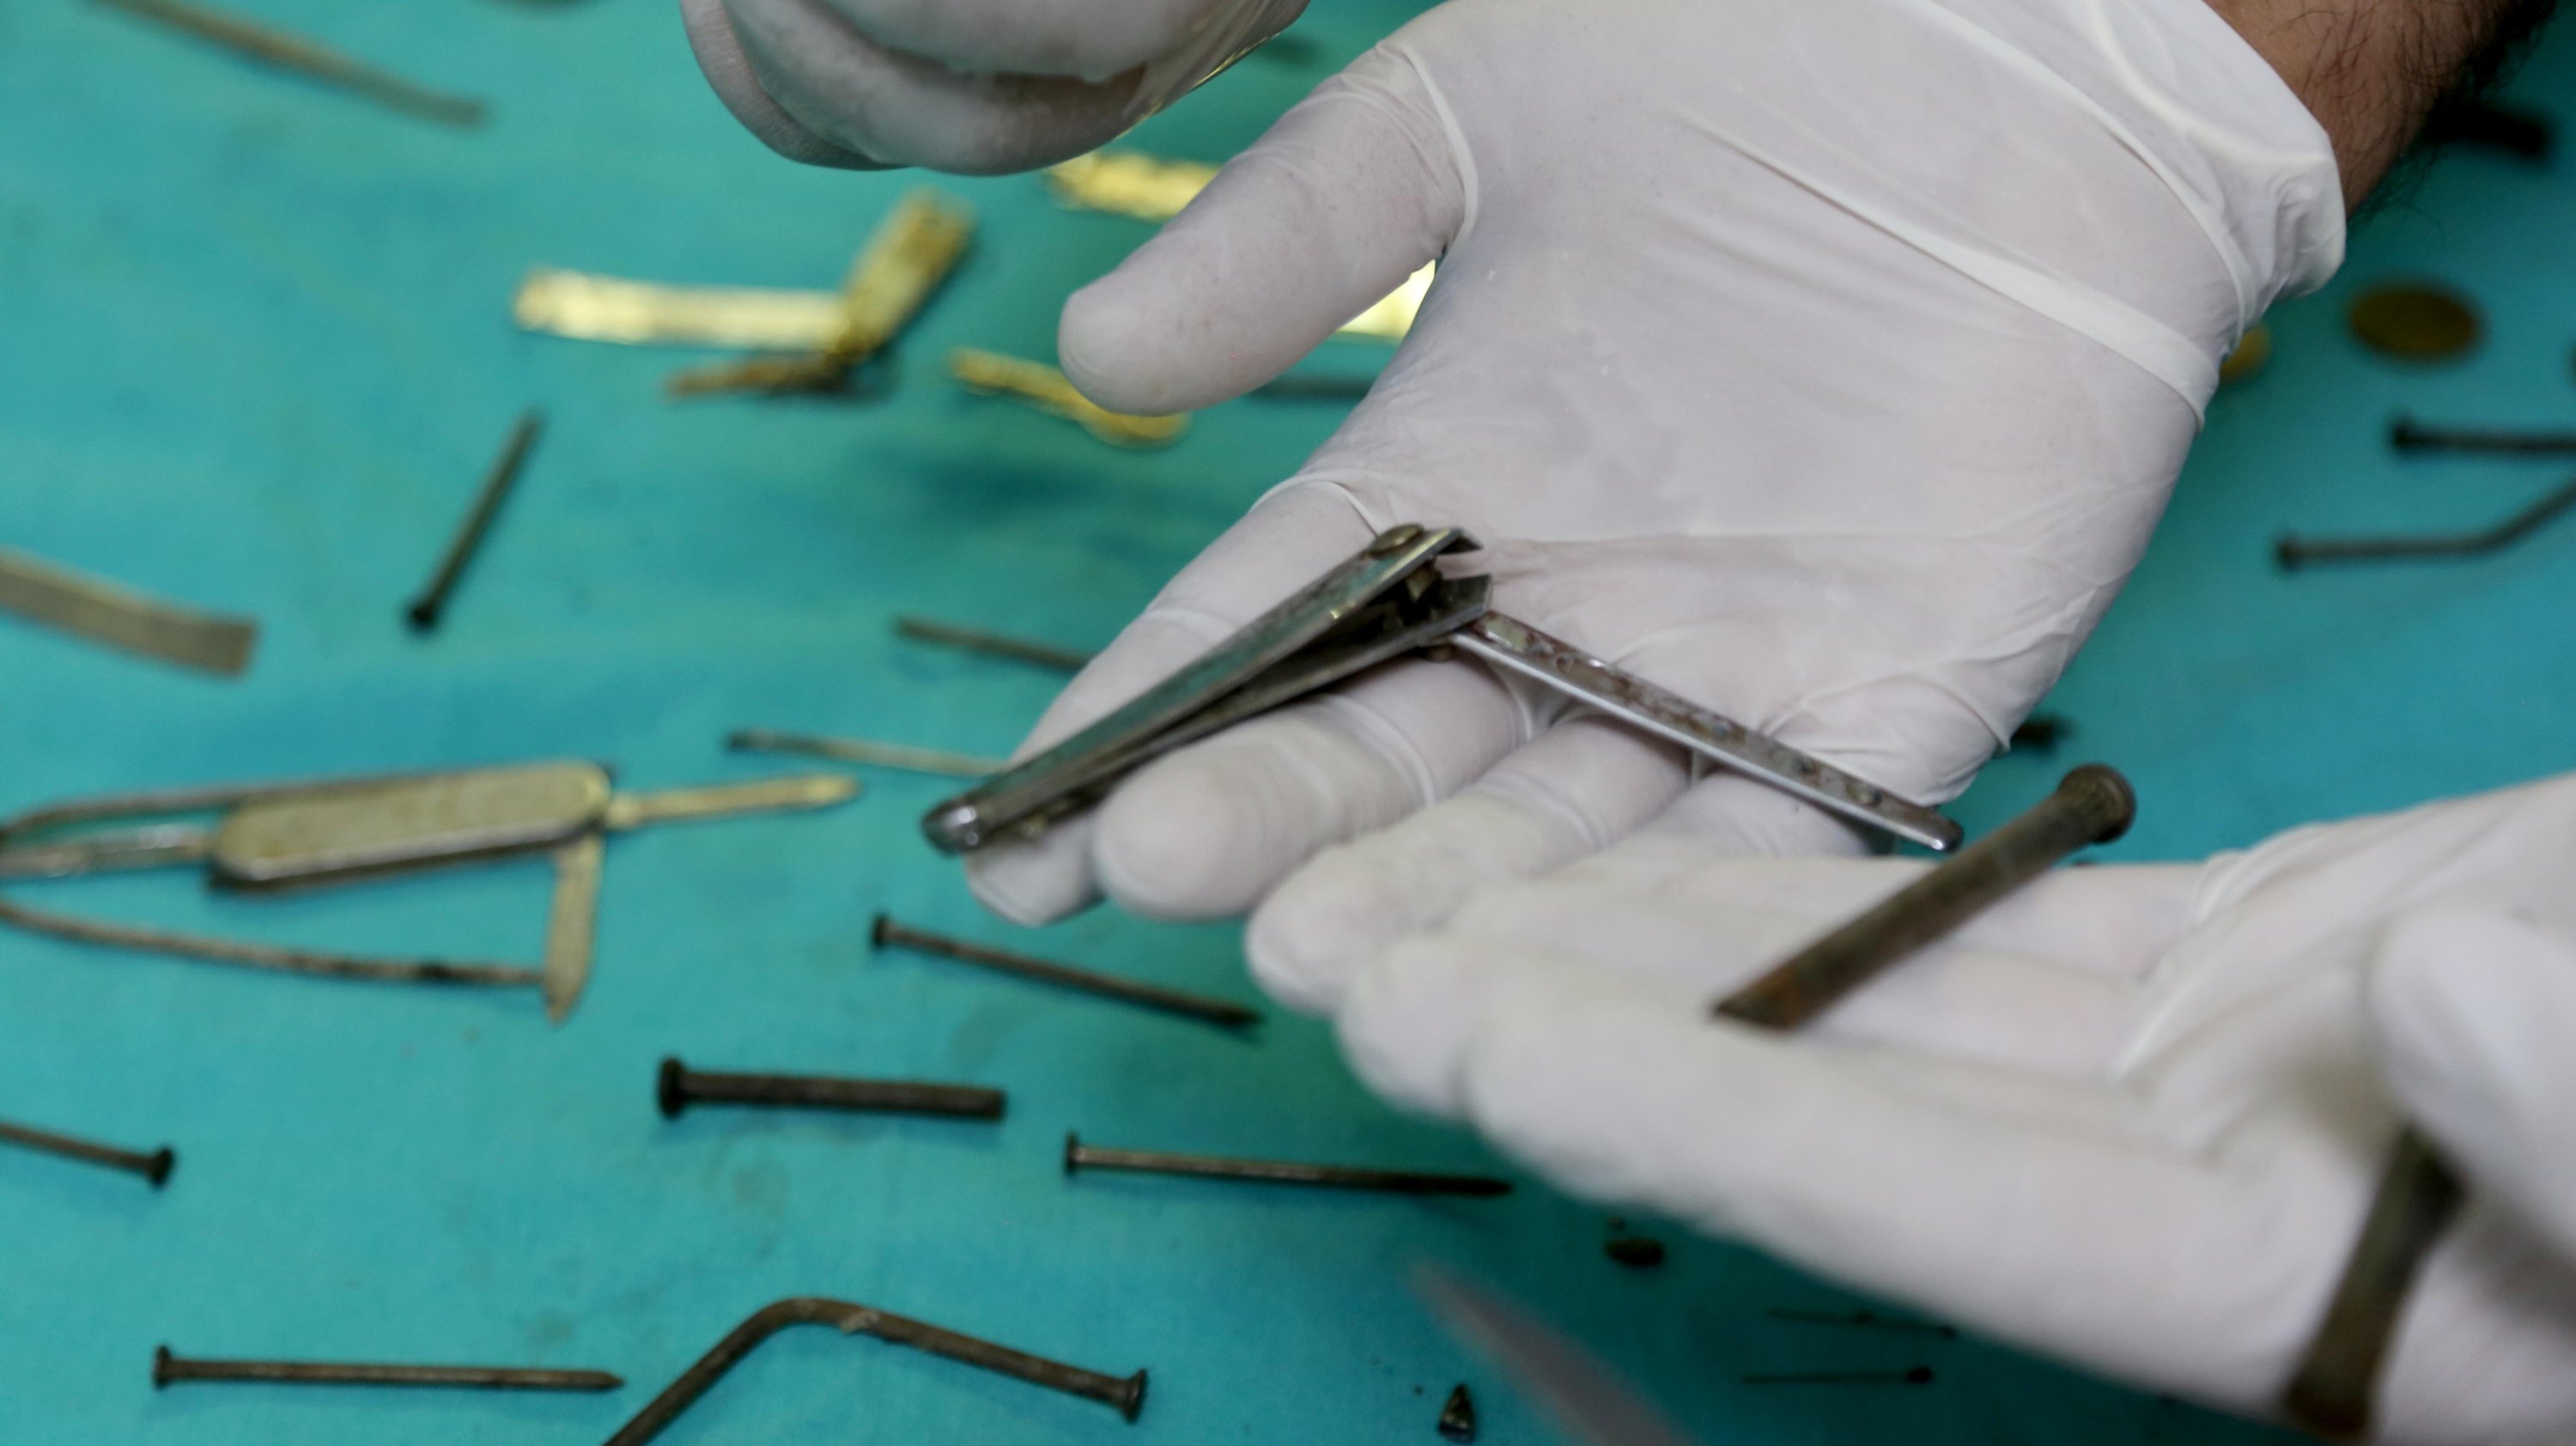 A doctor holds nail clippers and other metal objects extracted from the stomach of a 24-year-old woman who was rushed to the hospital with stomach pain after swallowing a needle in Van, Turkey, July 18, 2022. (AA Photo)